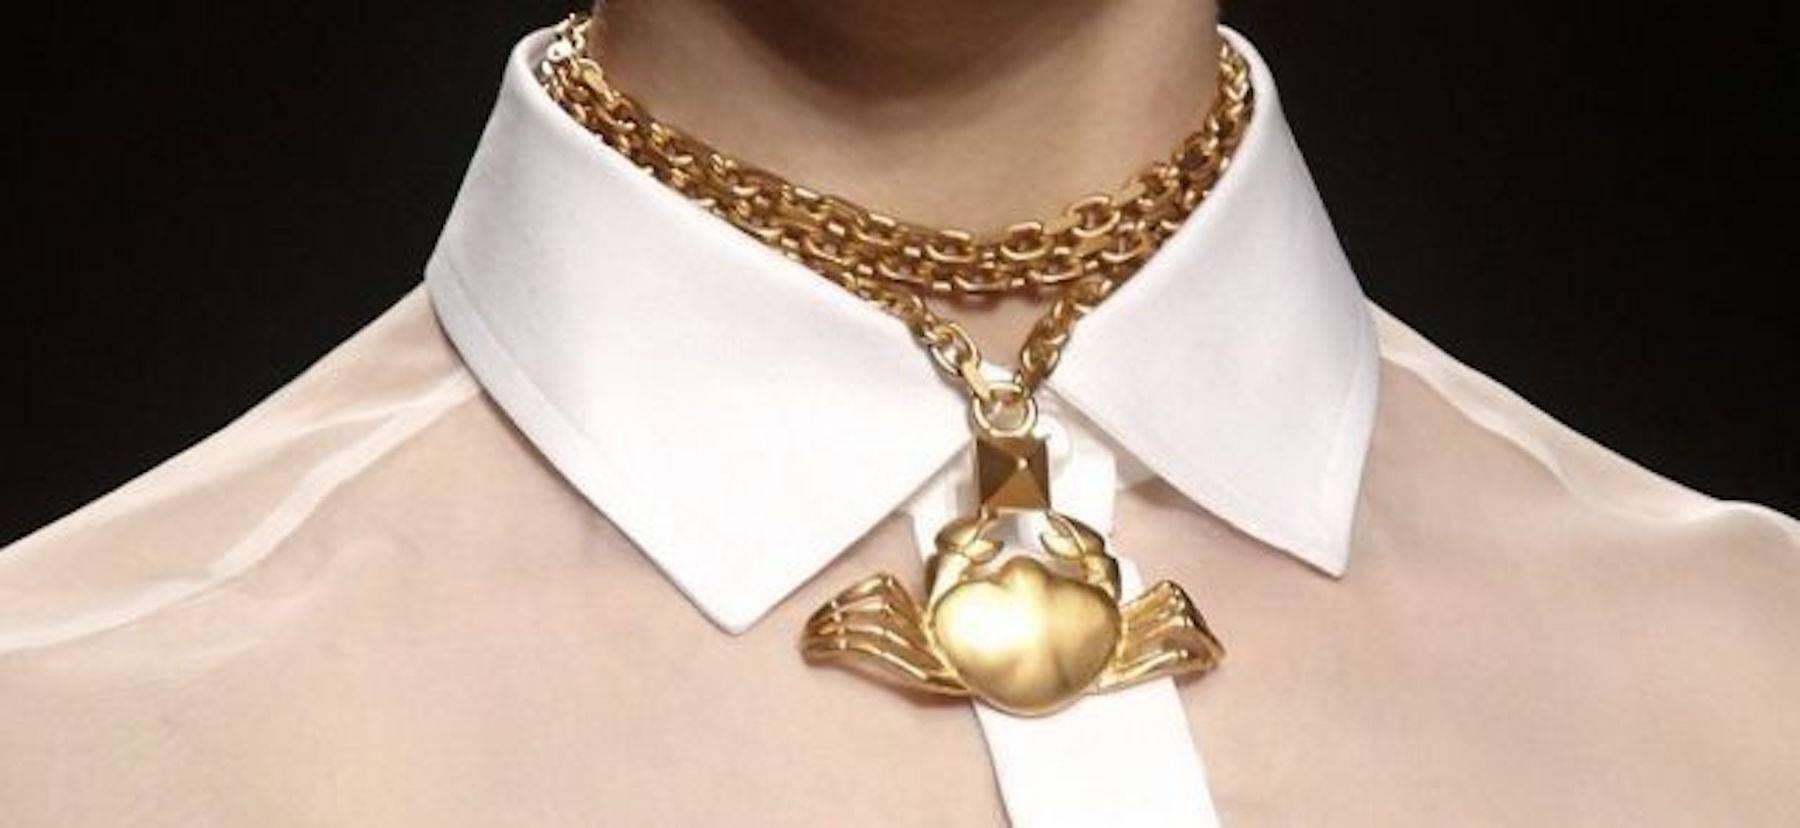 CURATOR'S NOTES

Cancer - June 20 - July 22

Style Tip: Rock it long or double it up as a choker!

Metal
Gold tone
Lobster claw closure
Total length 37.5